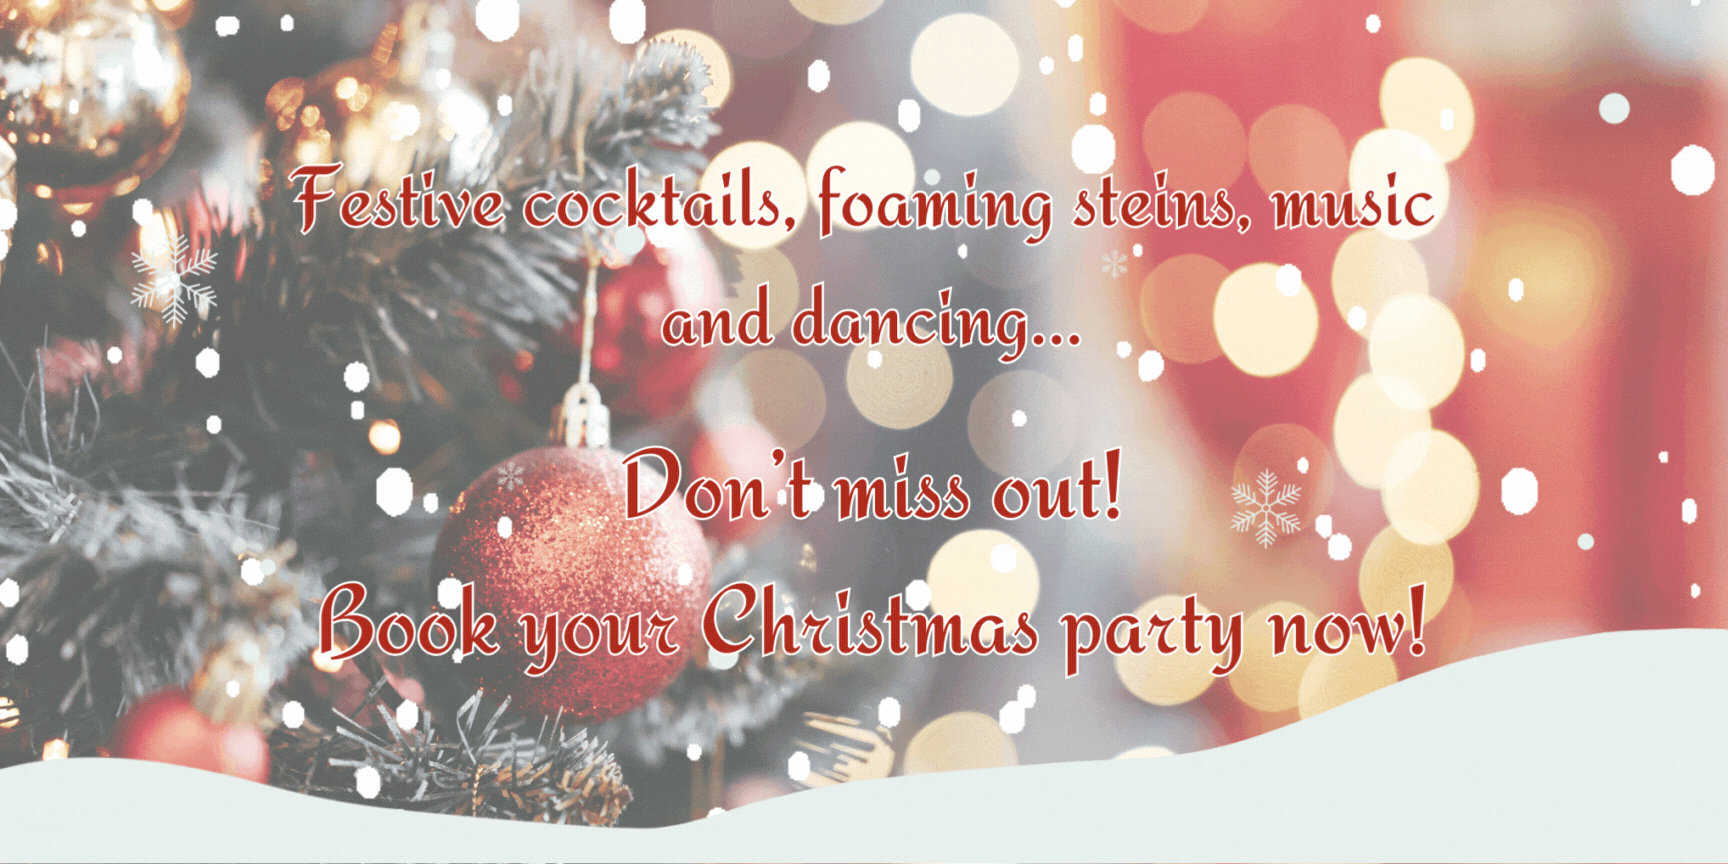 Festive cocktails, foaming steins, music and dancing... Don't miss out! Book your Christmas party now!